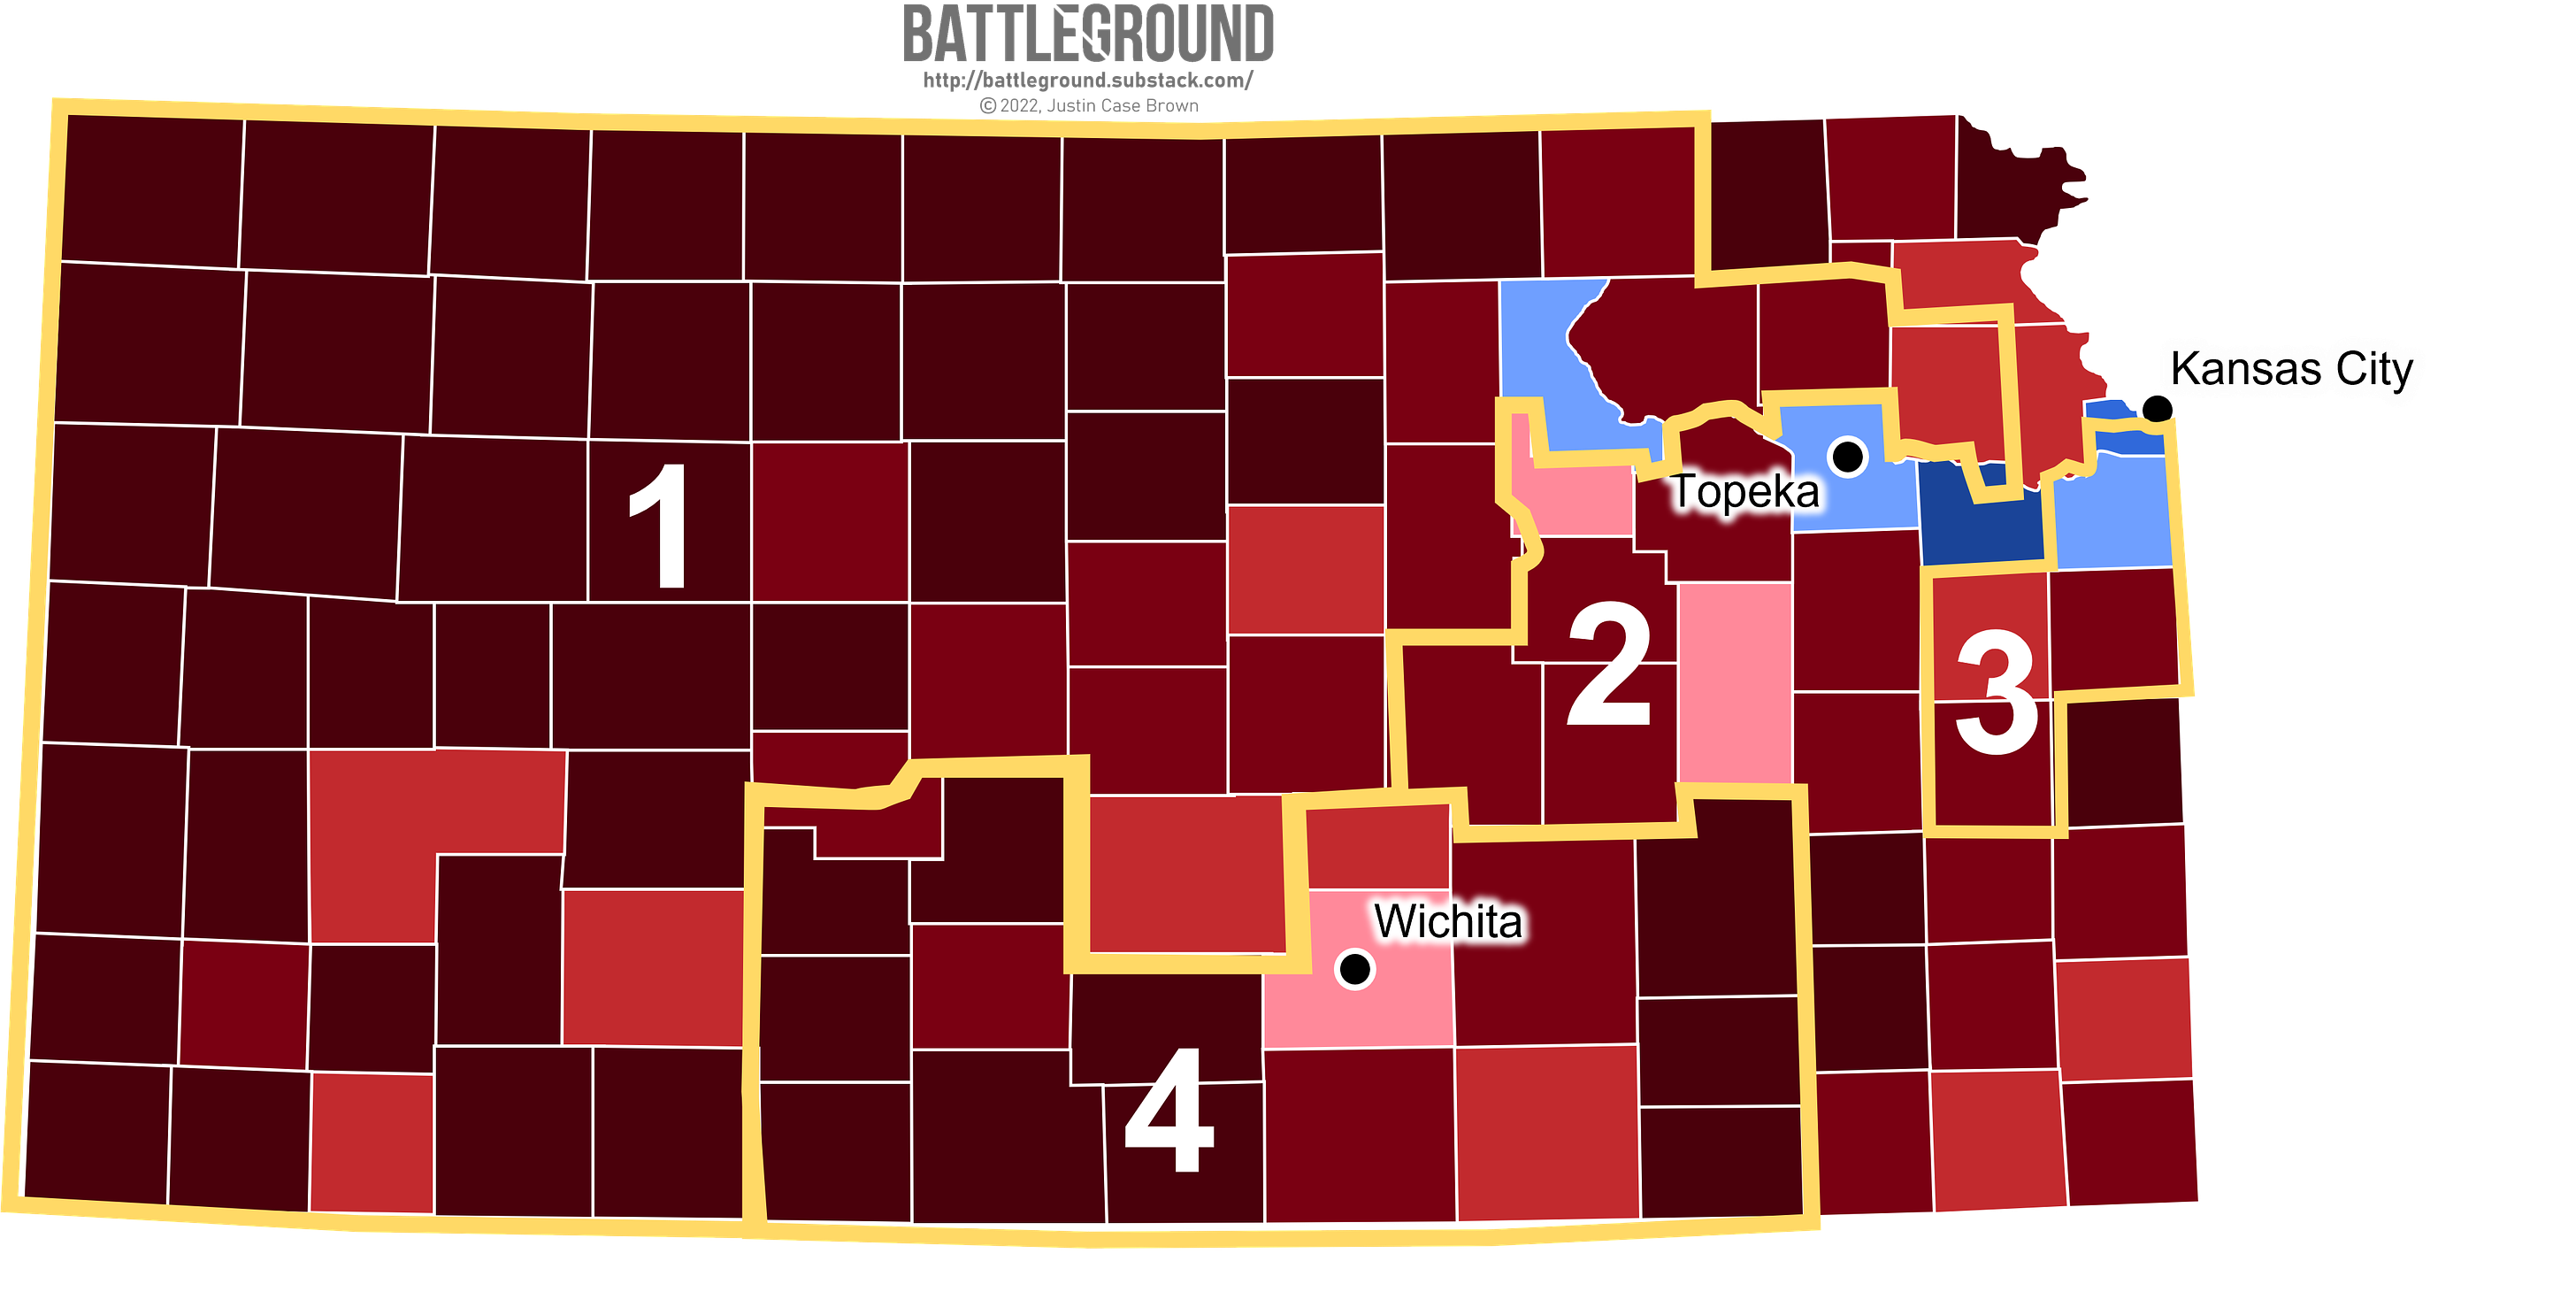 2020 Election Results Overlay New Congressional Districts, Kansas